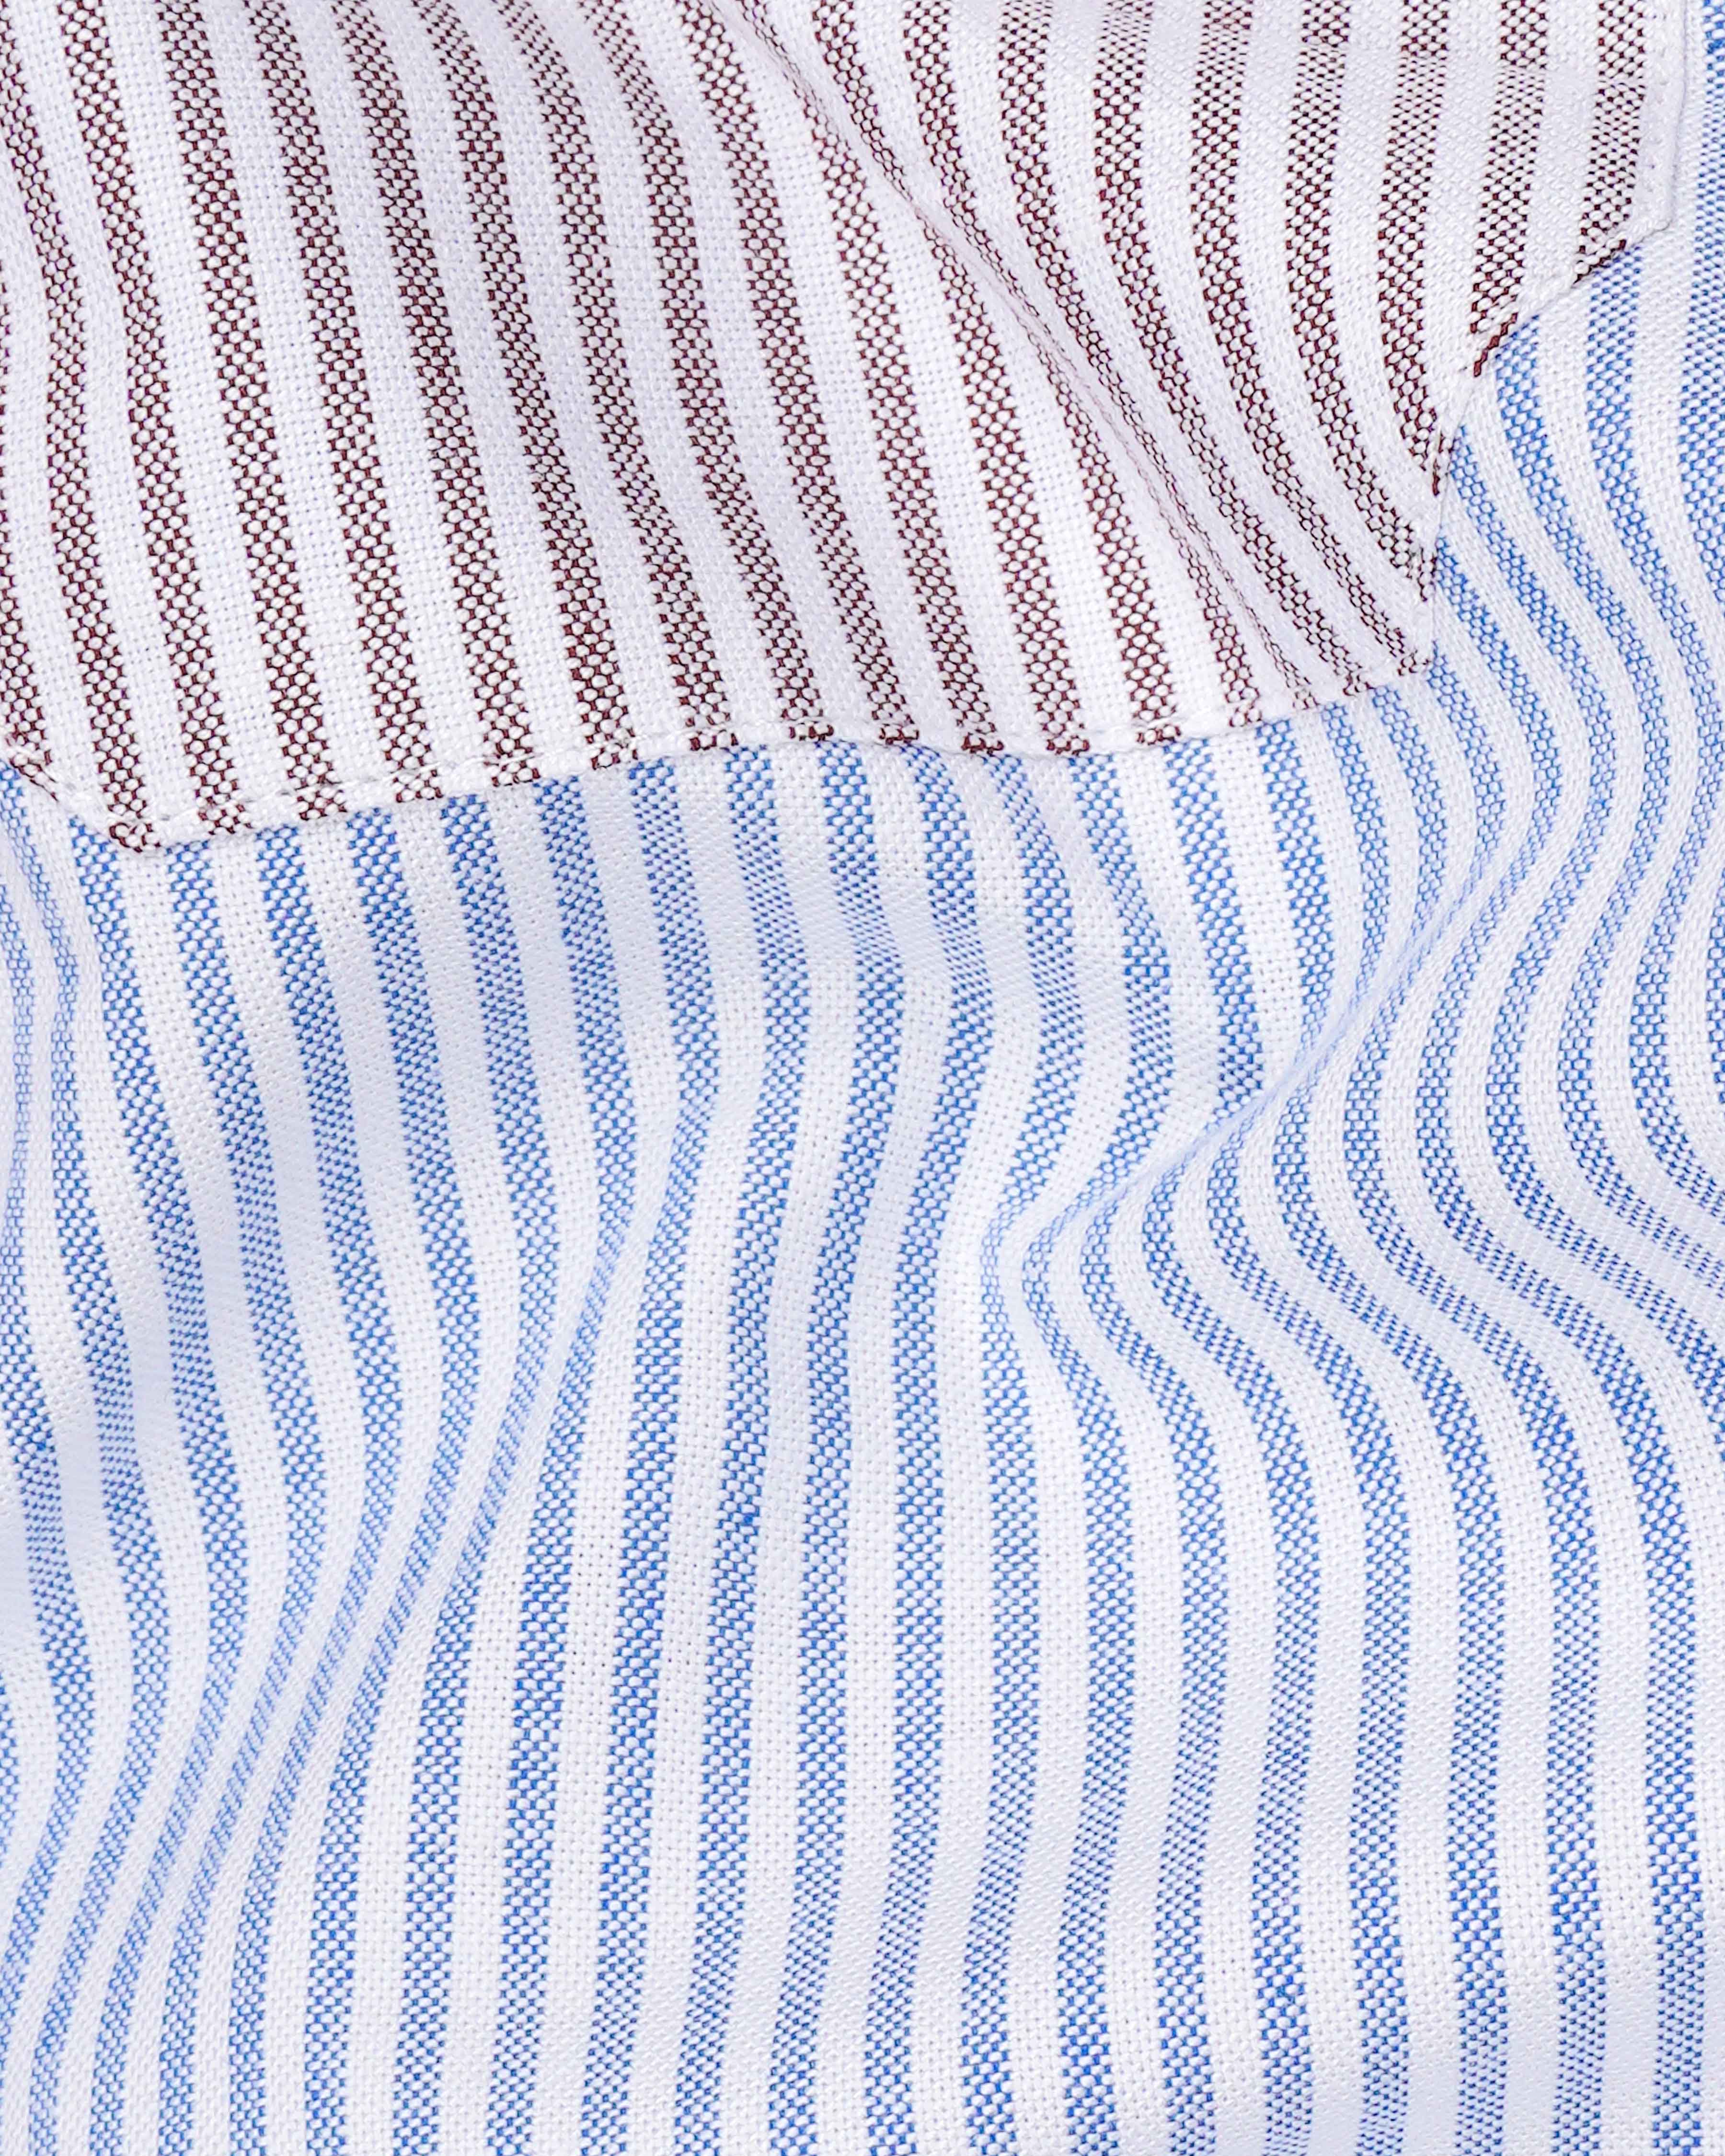 Mariner Blue and Pink Multicolour Striped Premium Cotton Designer Shirt 8142-P124-38, 8142-P124-H-38, 8142-P124-39, 8142-P124-H-39, 8142-P124-40, 8142-P124-H-40, 8142-P124-42, 8142-P124-H-42, 8142-P124-44, 8142-P124-H-44, 8142-P124-46, 8142-P124-H-46, 8142-P124-48, 8142-P124-H-48, 8142-P124-50, 8142-P124-H-50, 8142-P124-52, 8142-P124-H-52